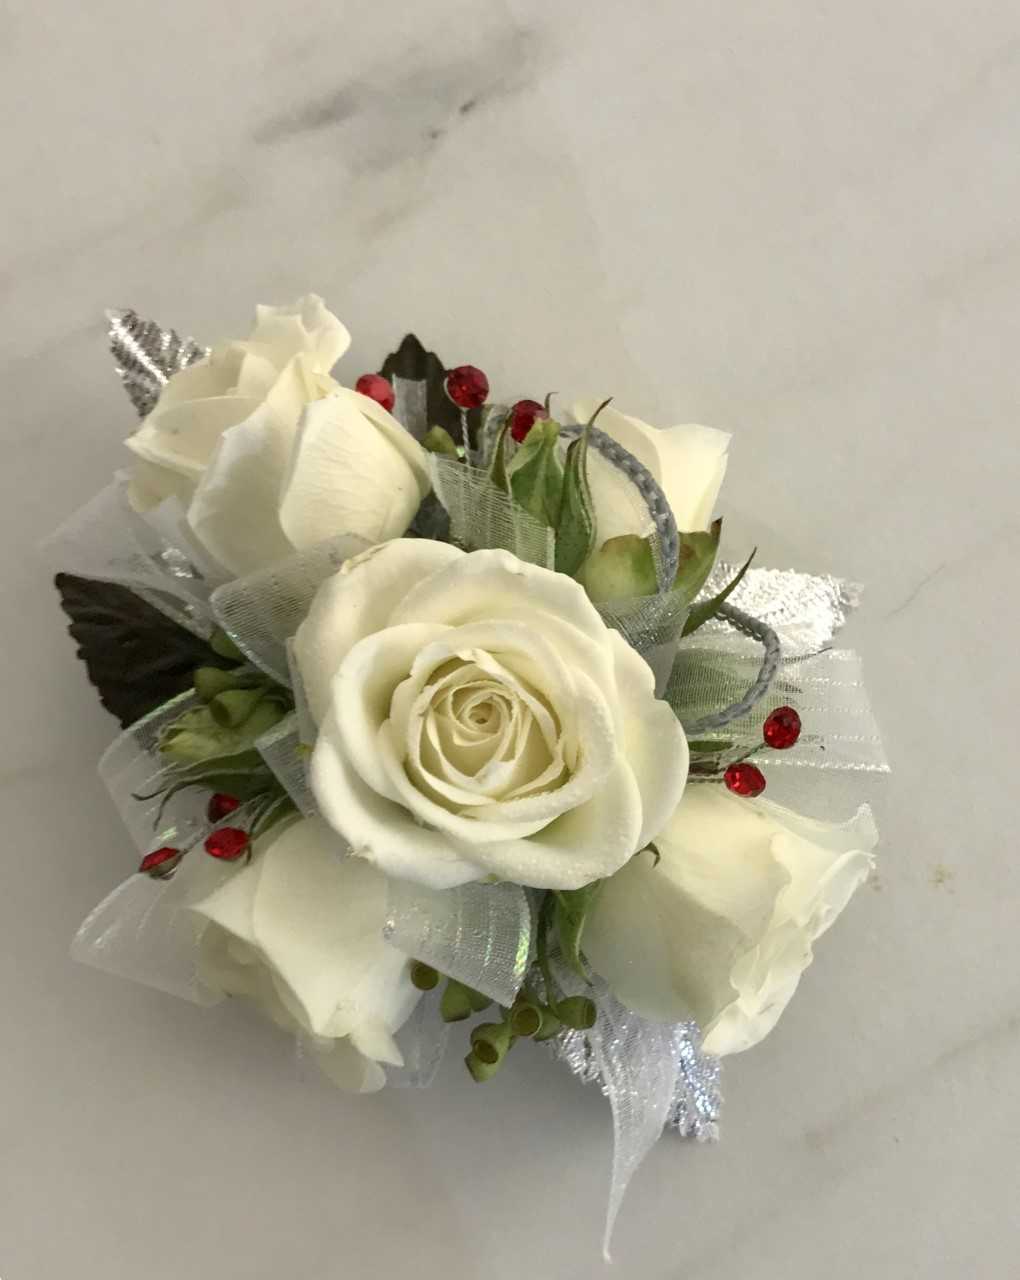 Wedding Corsages, Wrist Corsage, Rustic Wedding Corsage, Red Rose Cors –  Whiteroomfavors